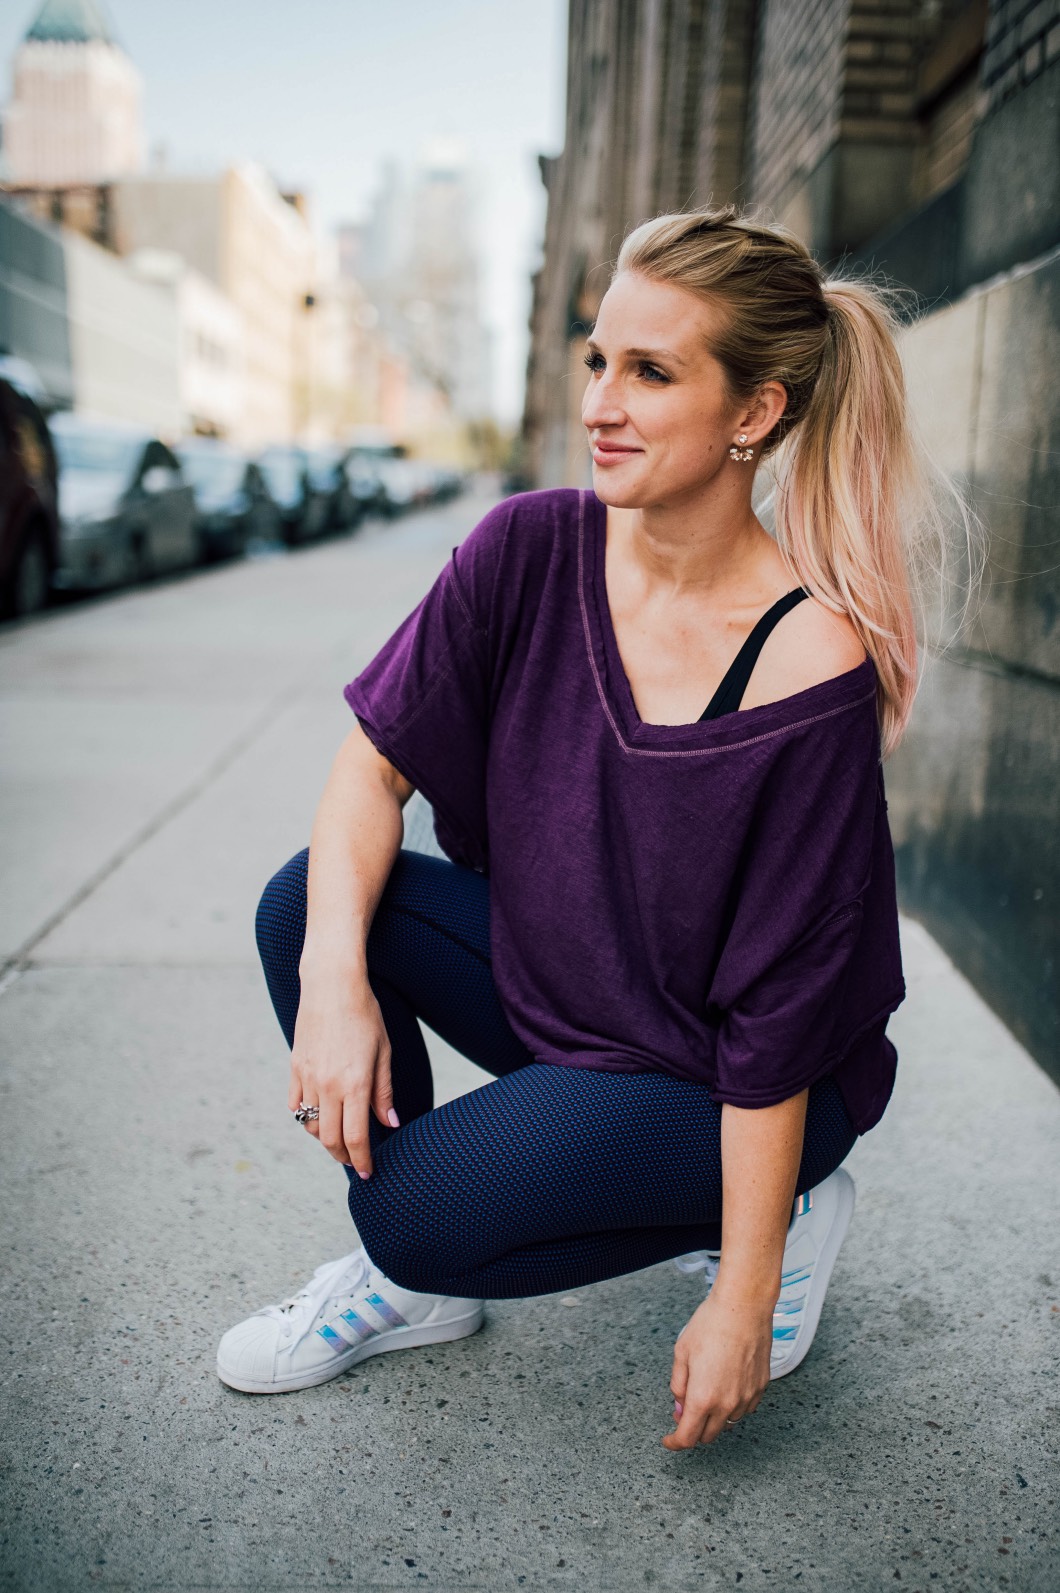 48 Hour NYC Travel Guide by lifestyle blogger Jessica of Happily Hughes